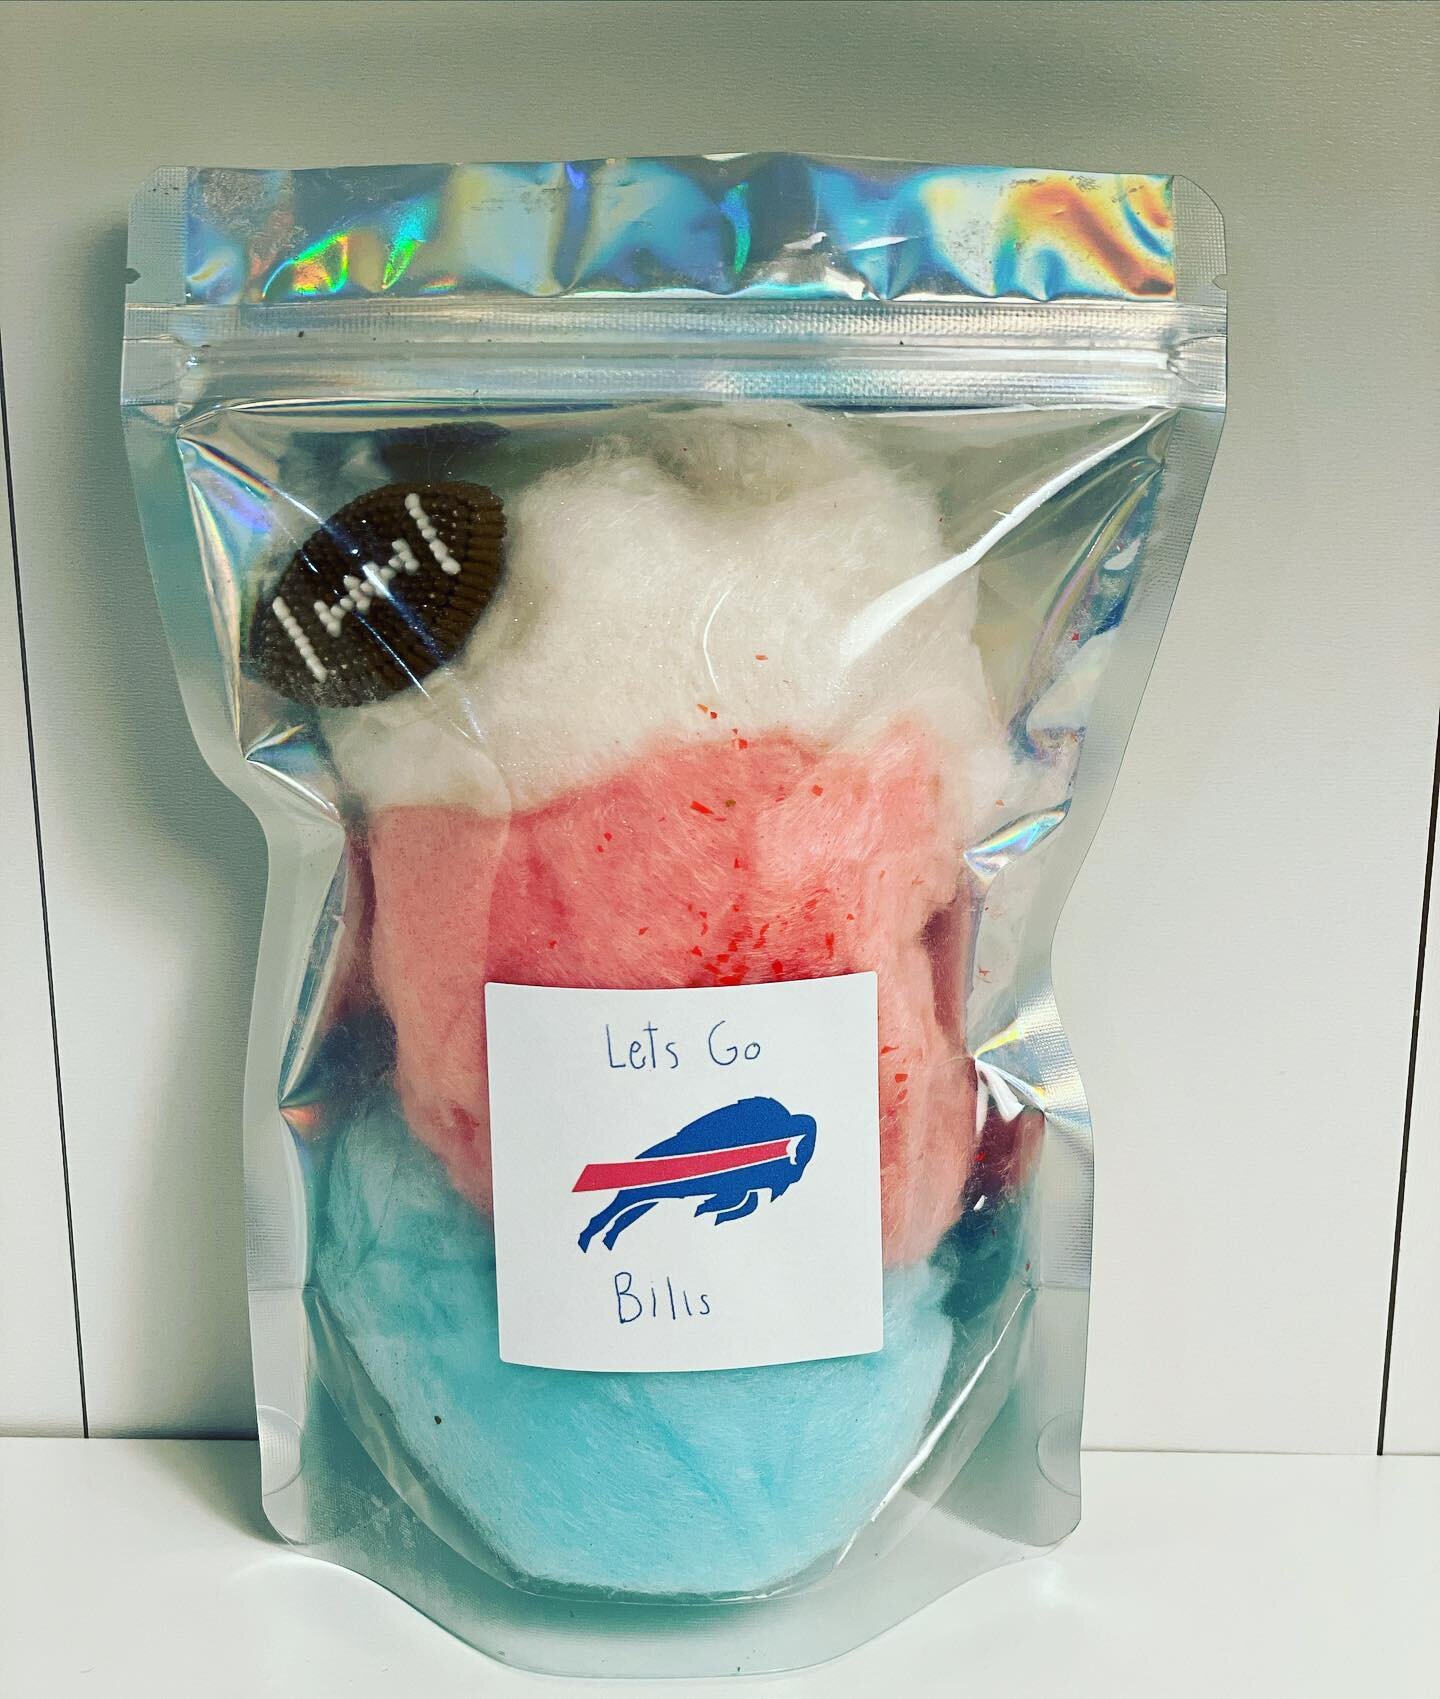 We had fun making this custom order for todays game. Let&rsquo;s go Bills!